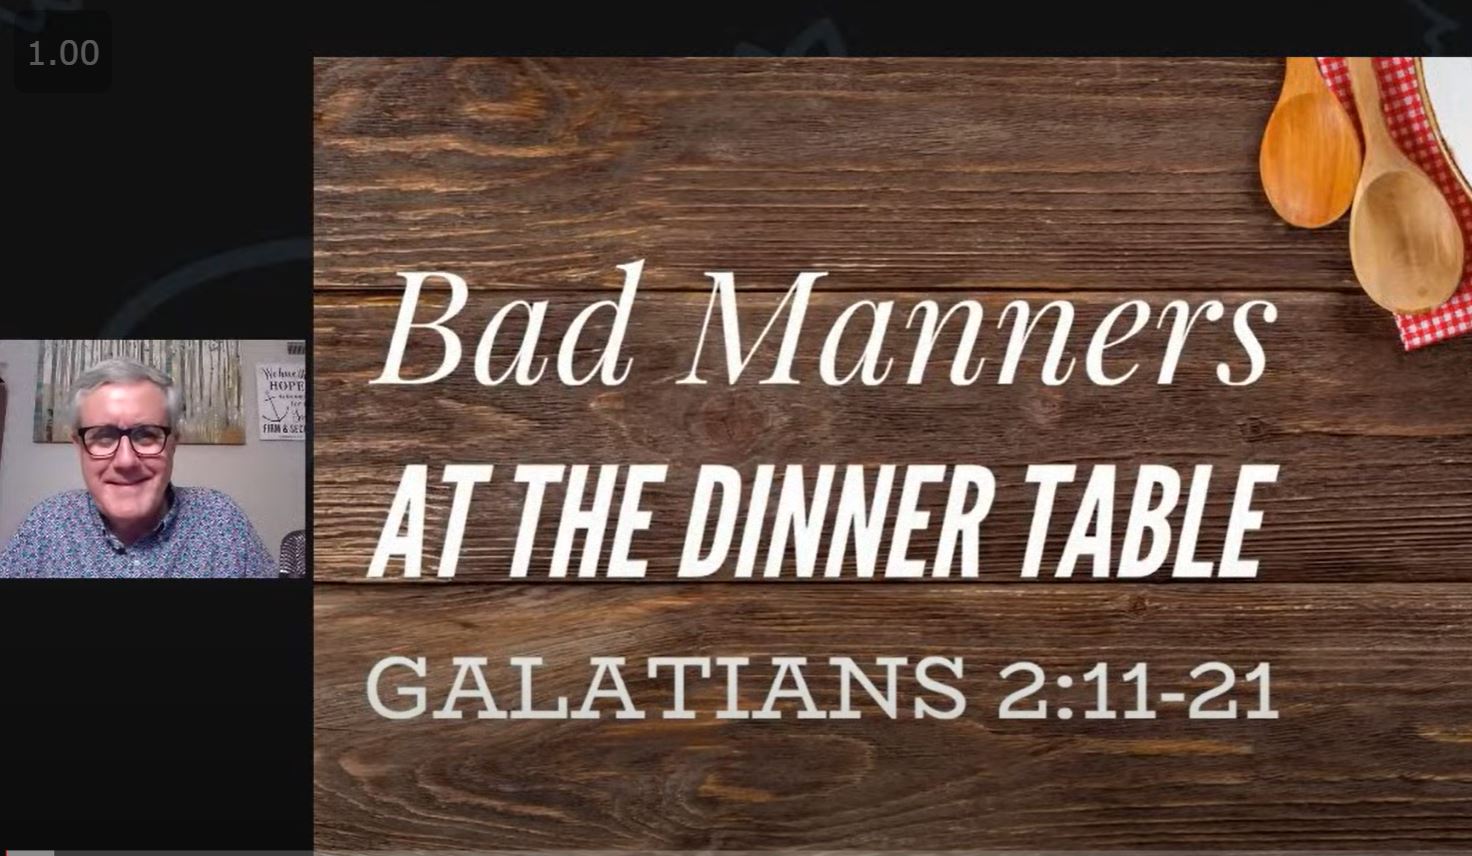 Bad Manners at the Dinner Table (Galatians 2:11-21)